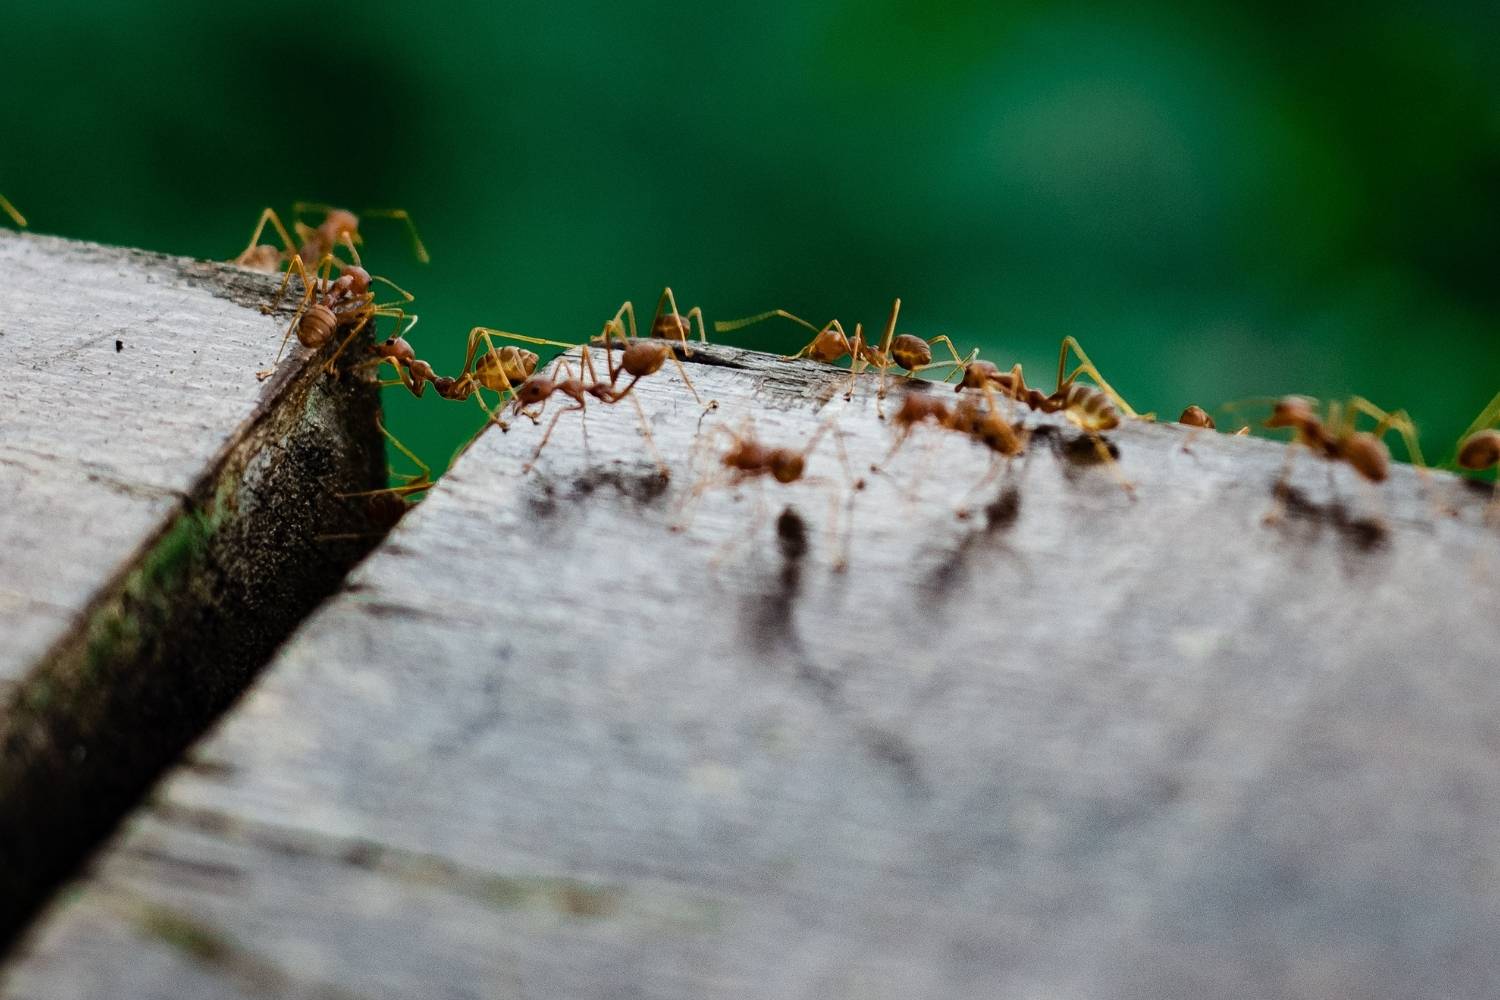 How To Get Ants Out Of Your Garden Bed